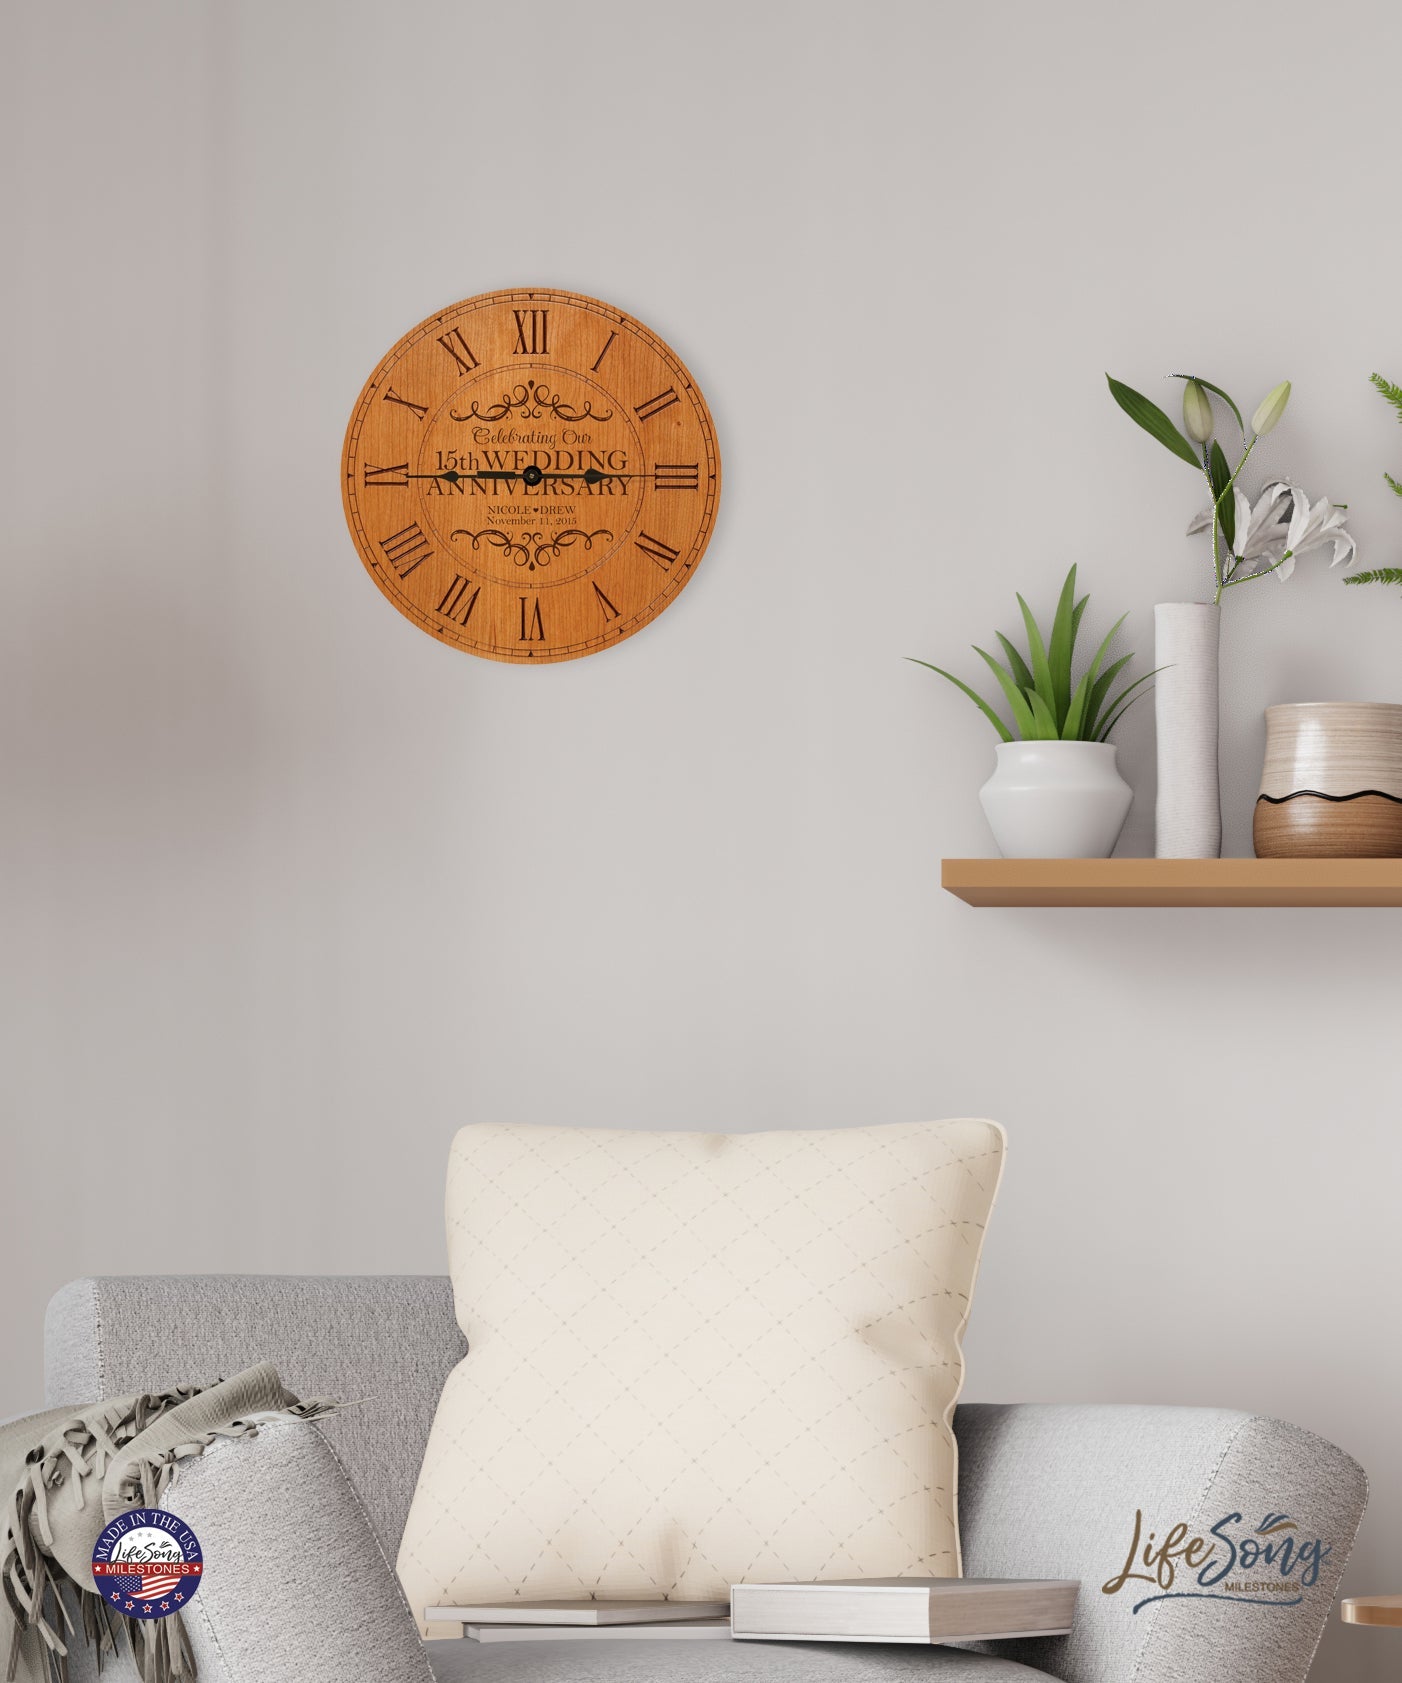 Personalized Engraved Wooden Wall Clock for 15th Wedding Anniversary Gift Ideas - LifeSong Milestones